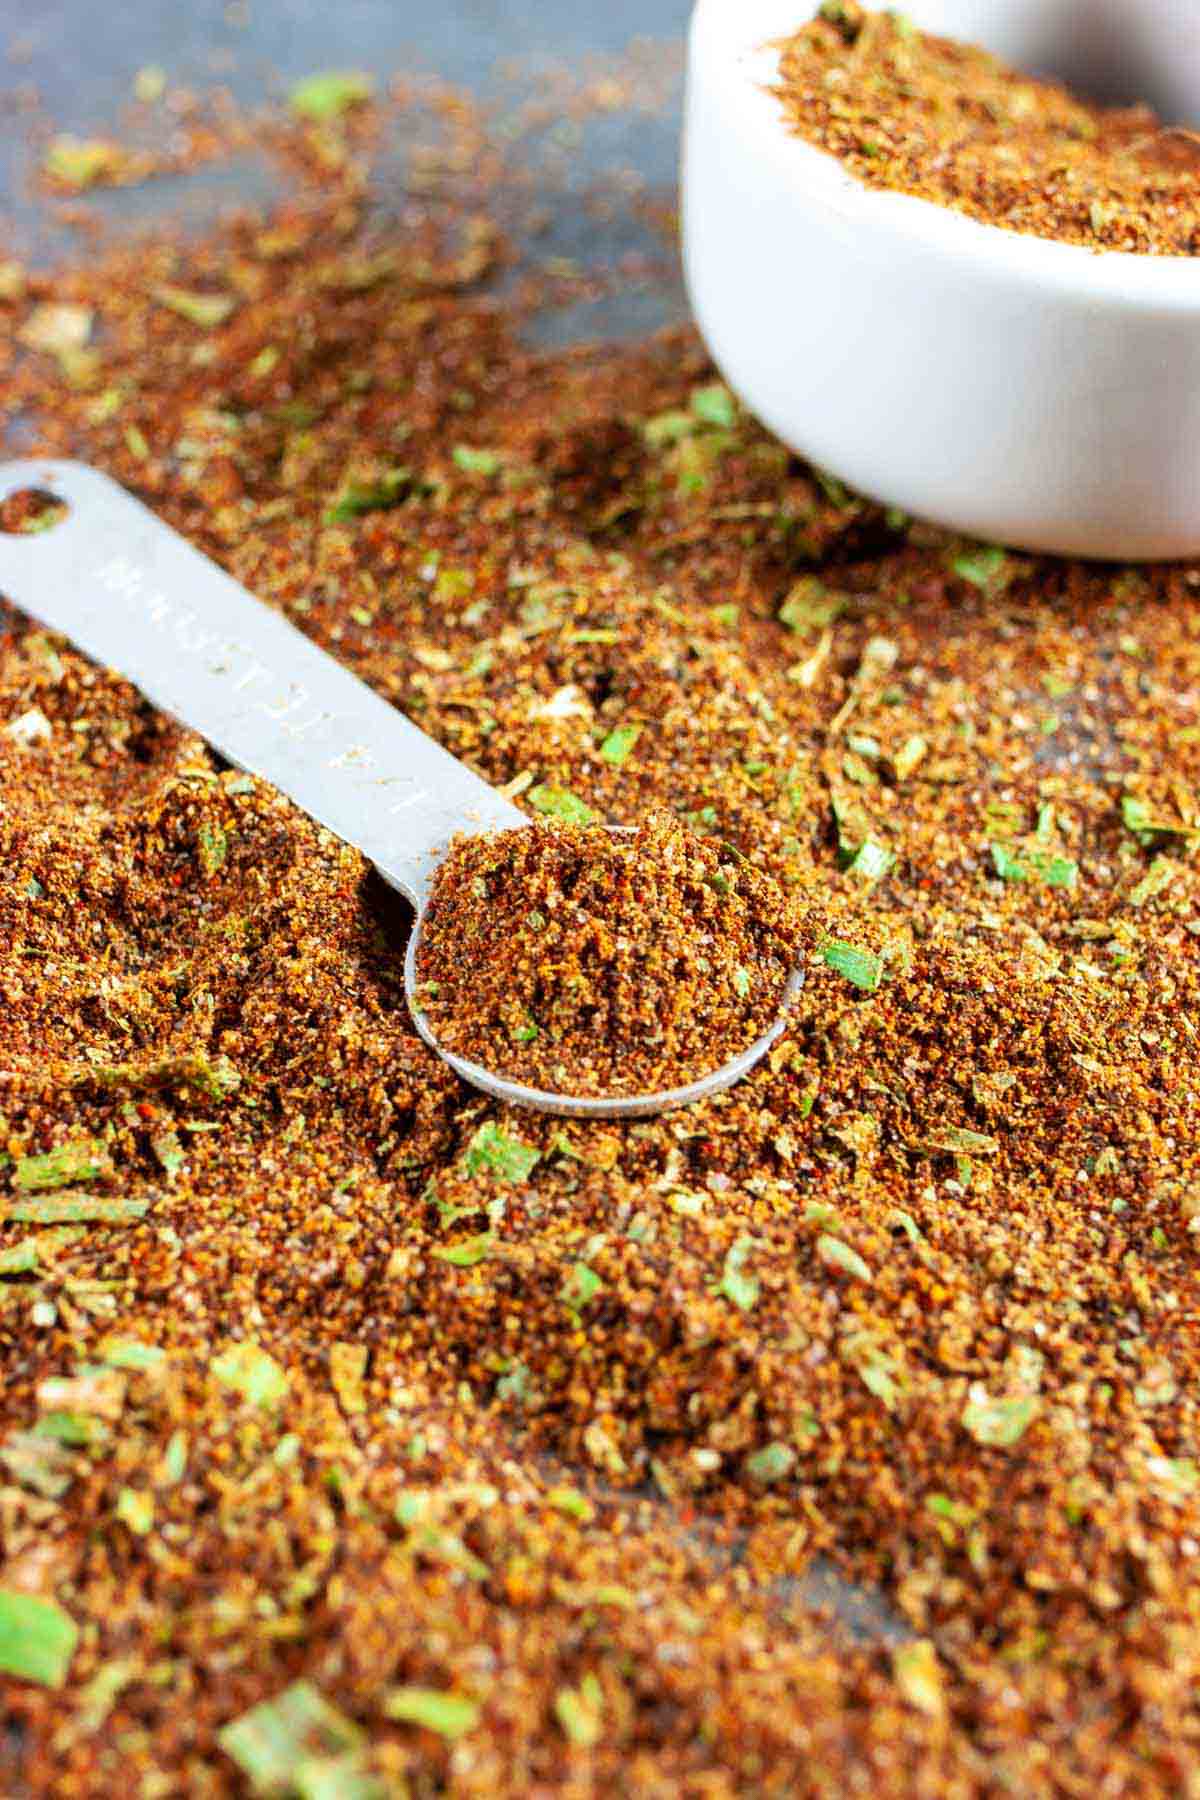 Pile of taco seasoning with some on a teaspoon.